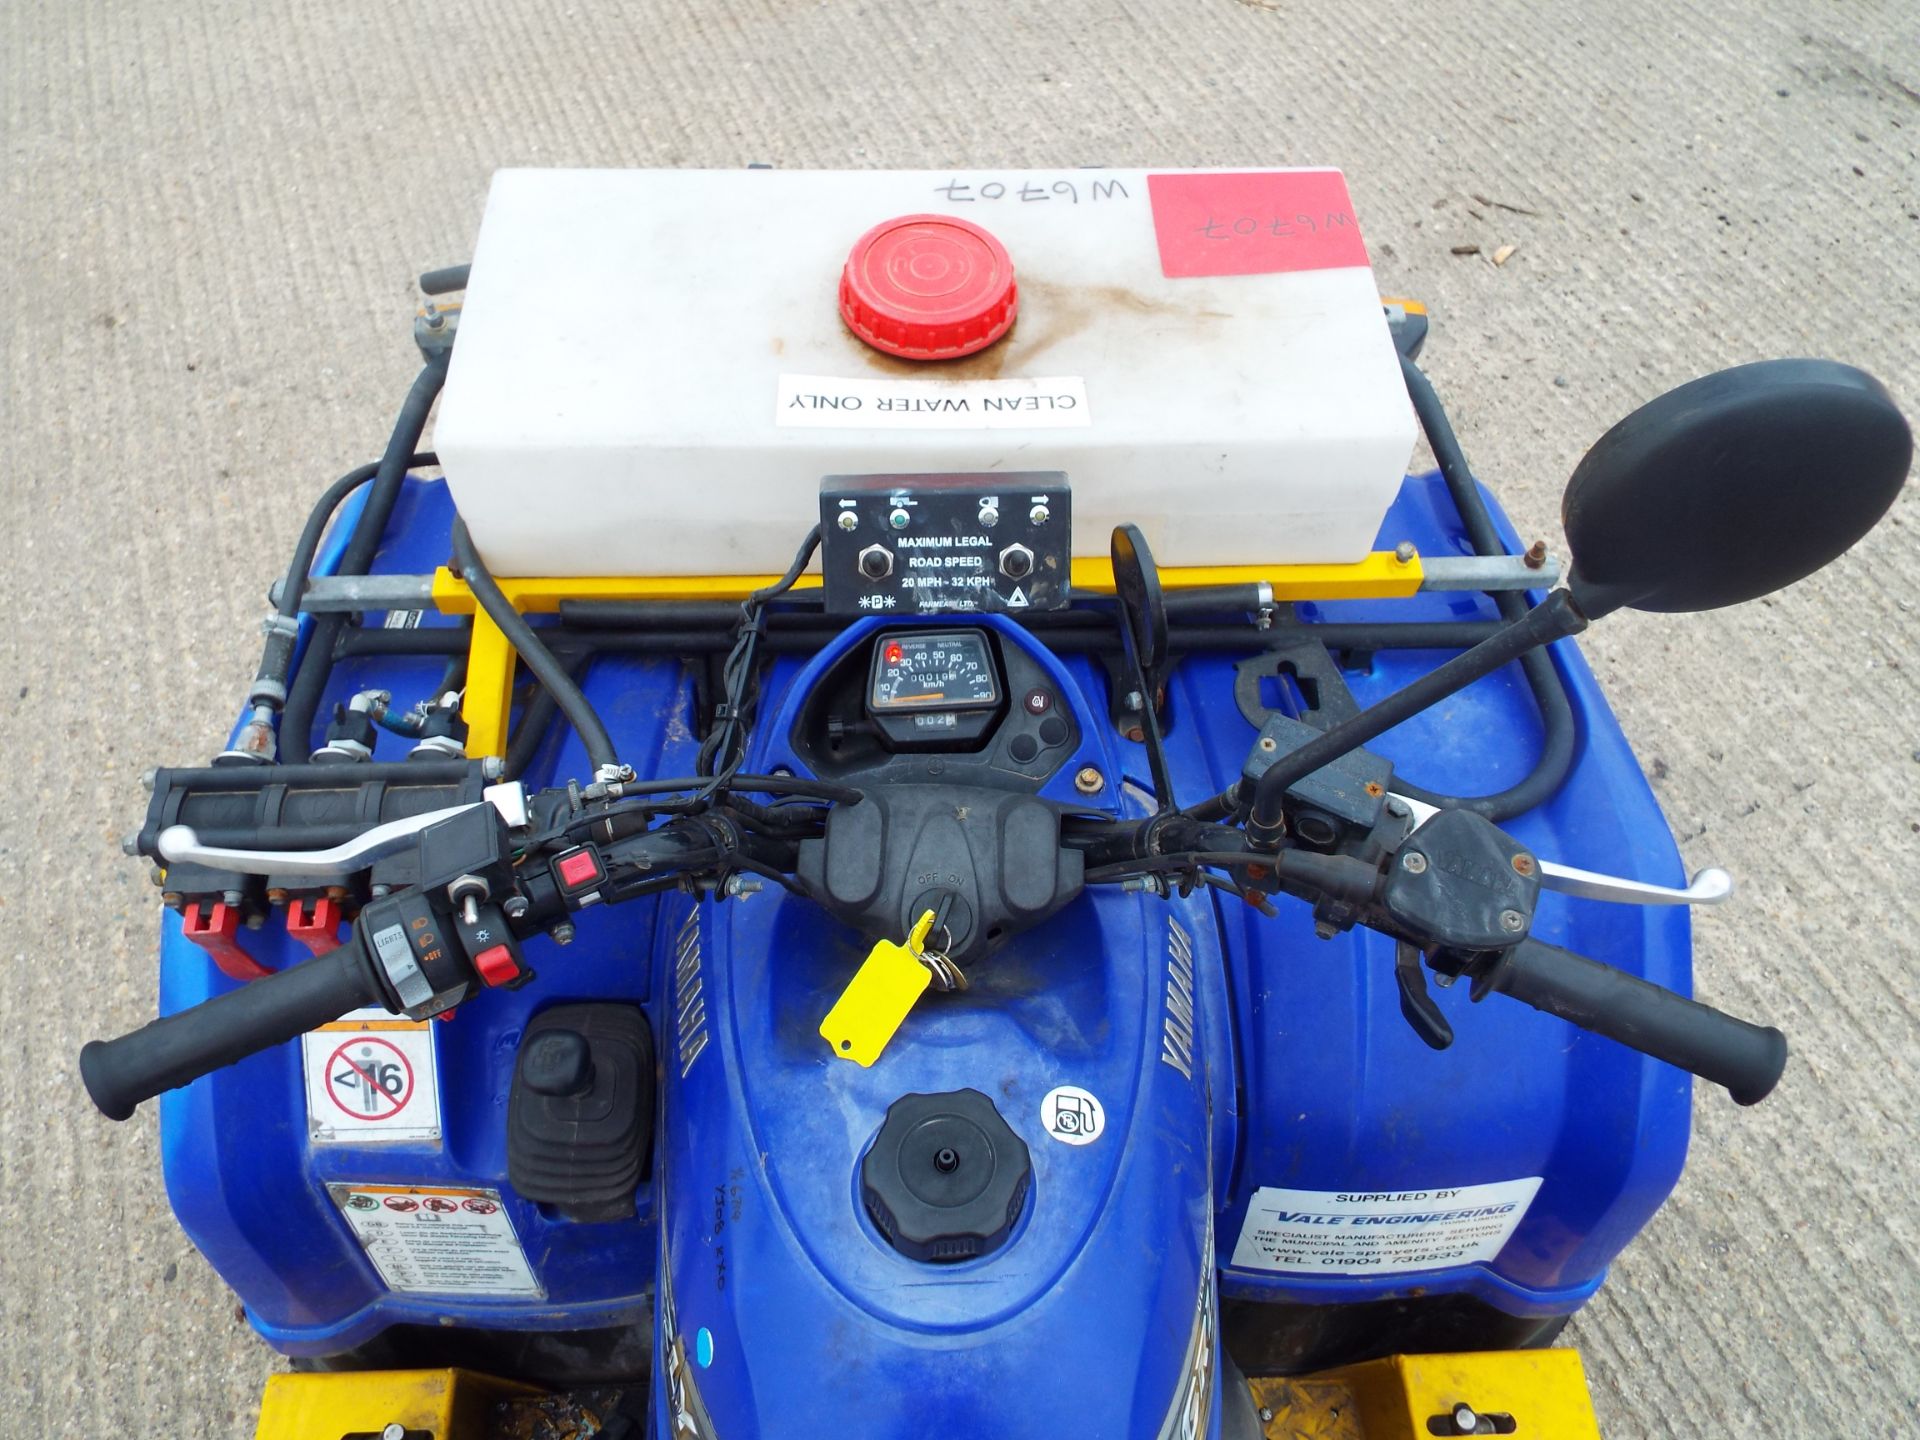 2008 Yamaha Grizzly 350 Ultramatic Quad Bike fitted with Vale Front/Rear Spraying Equipment - Image 10 of 26